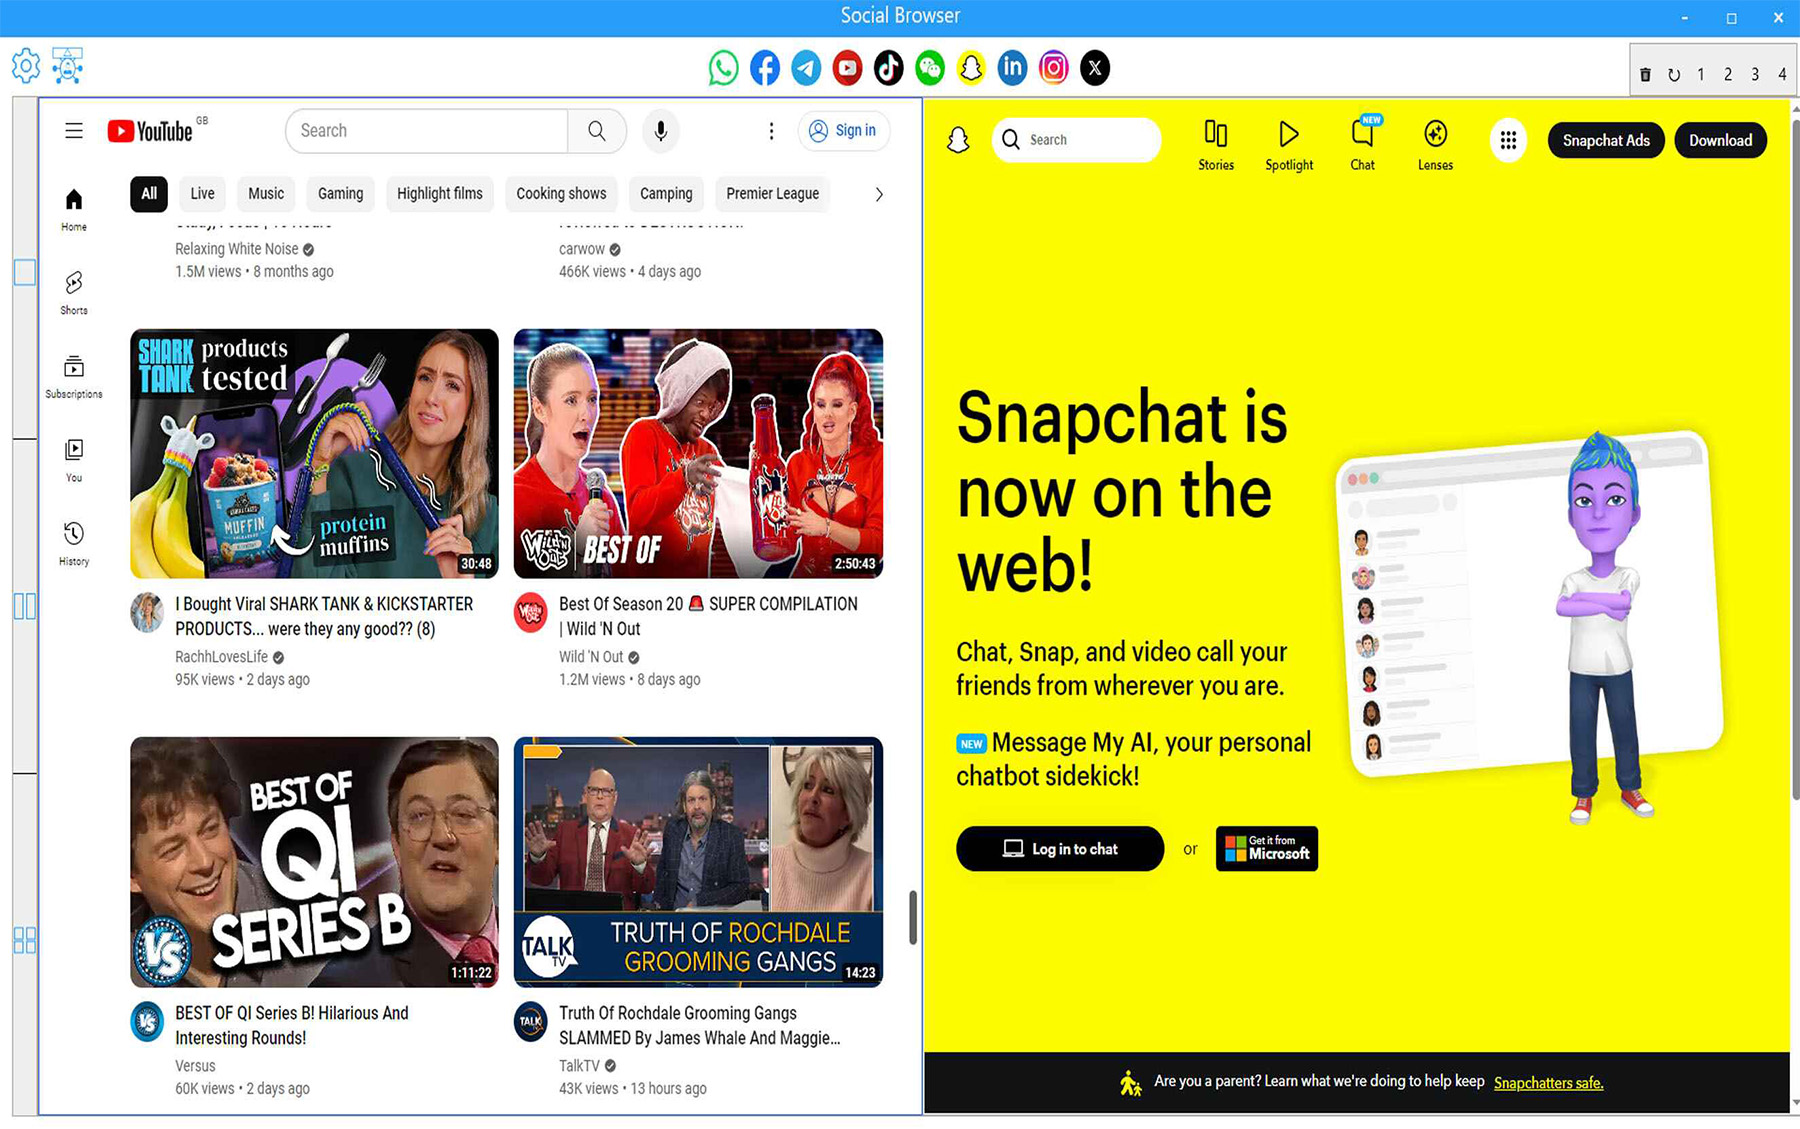 One Social Browser screen